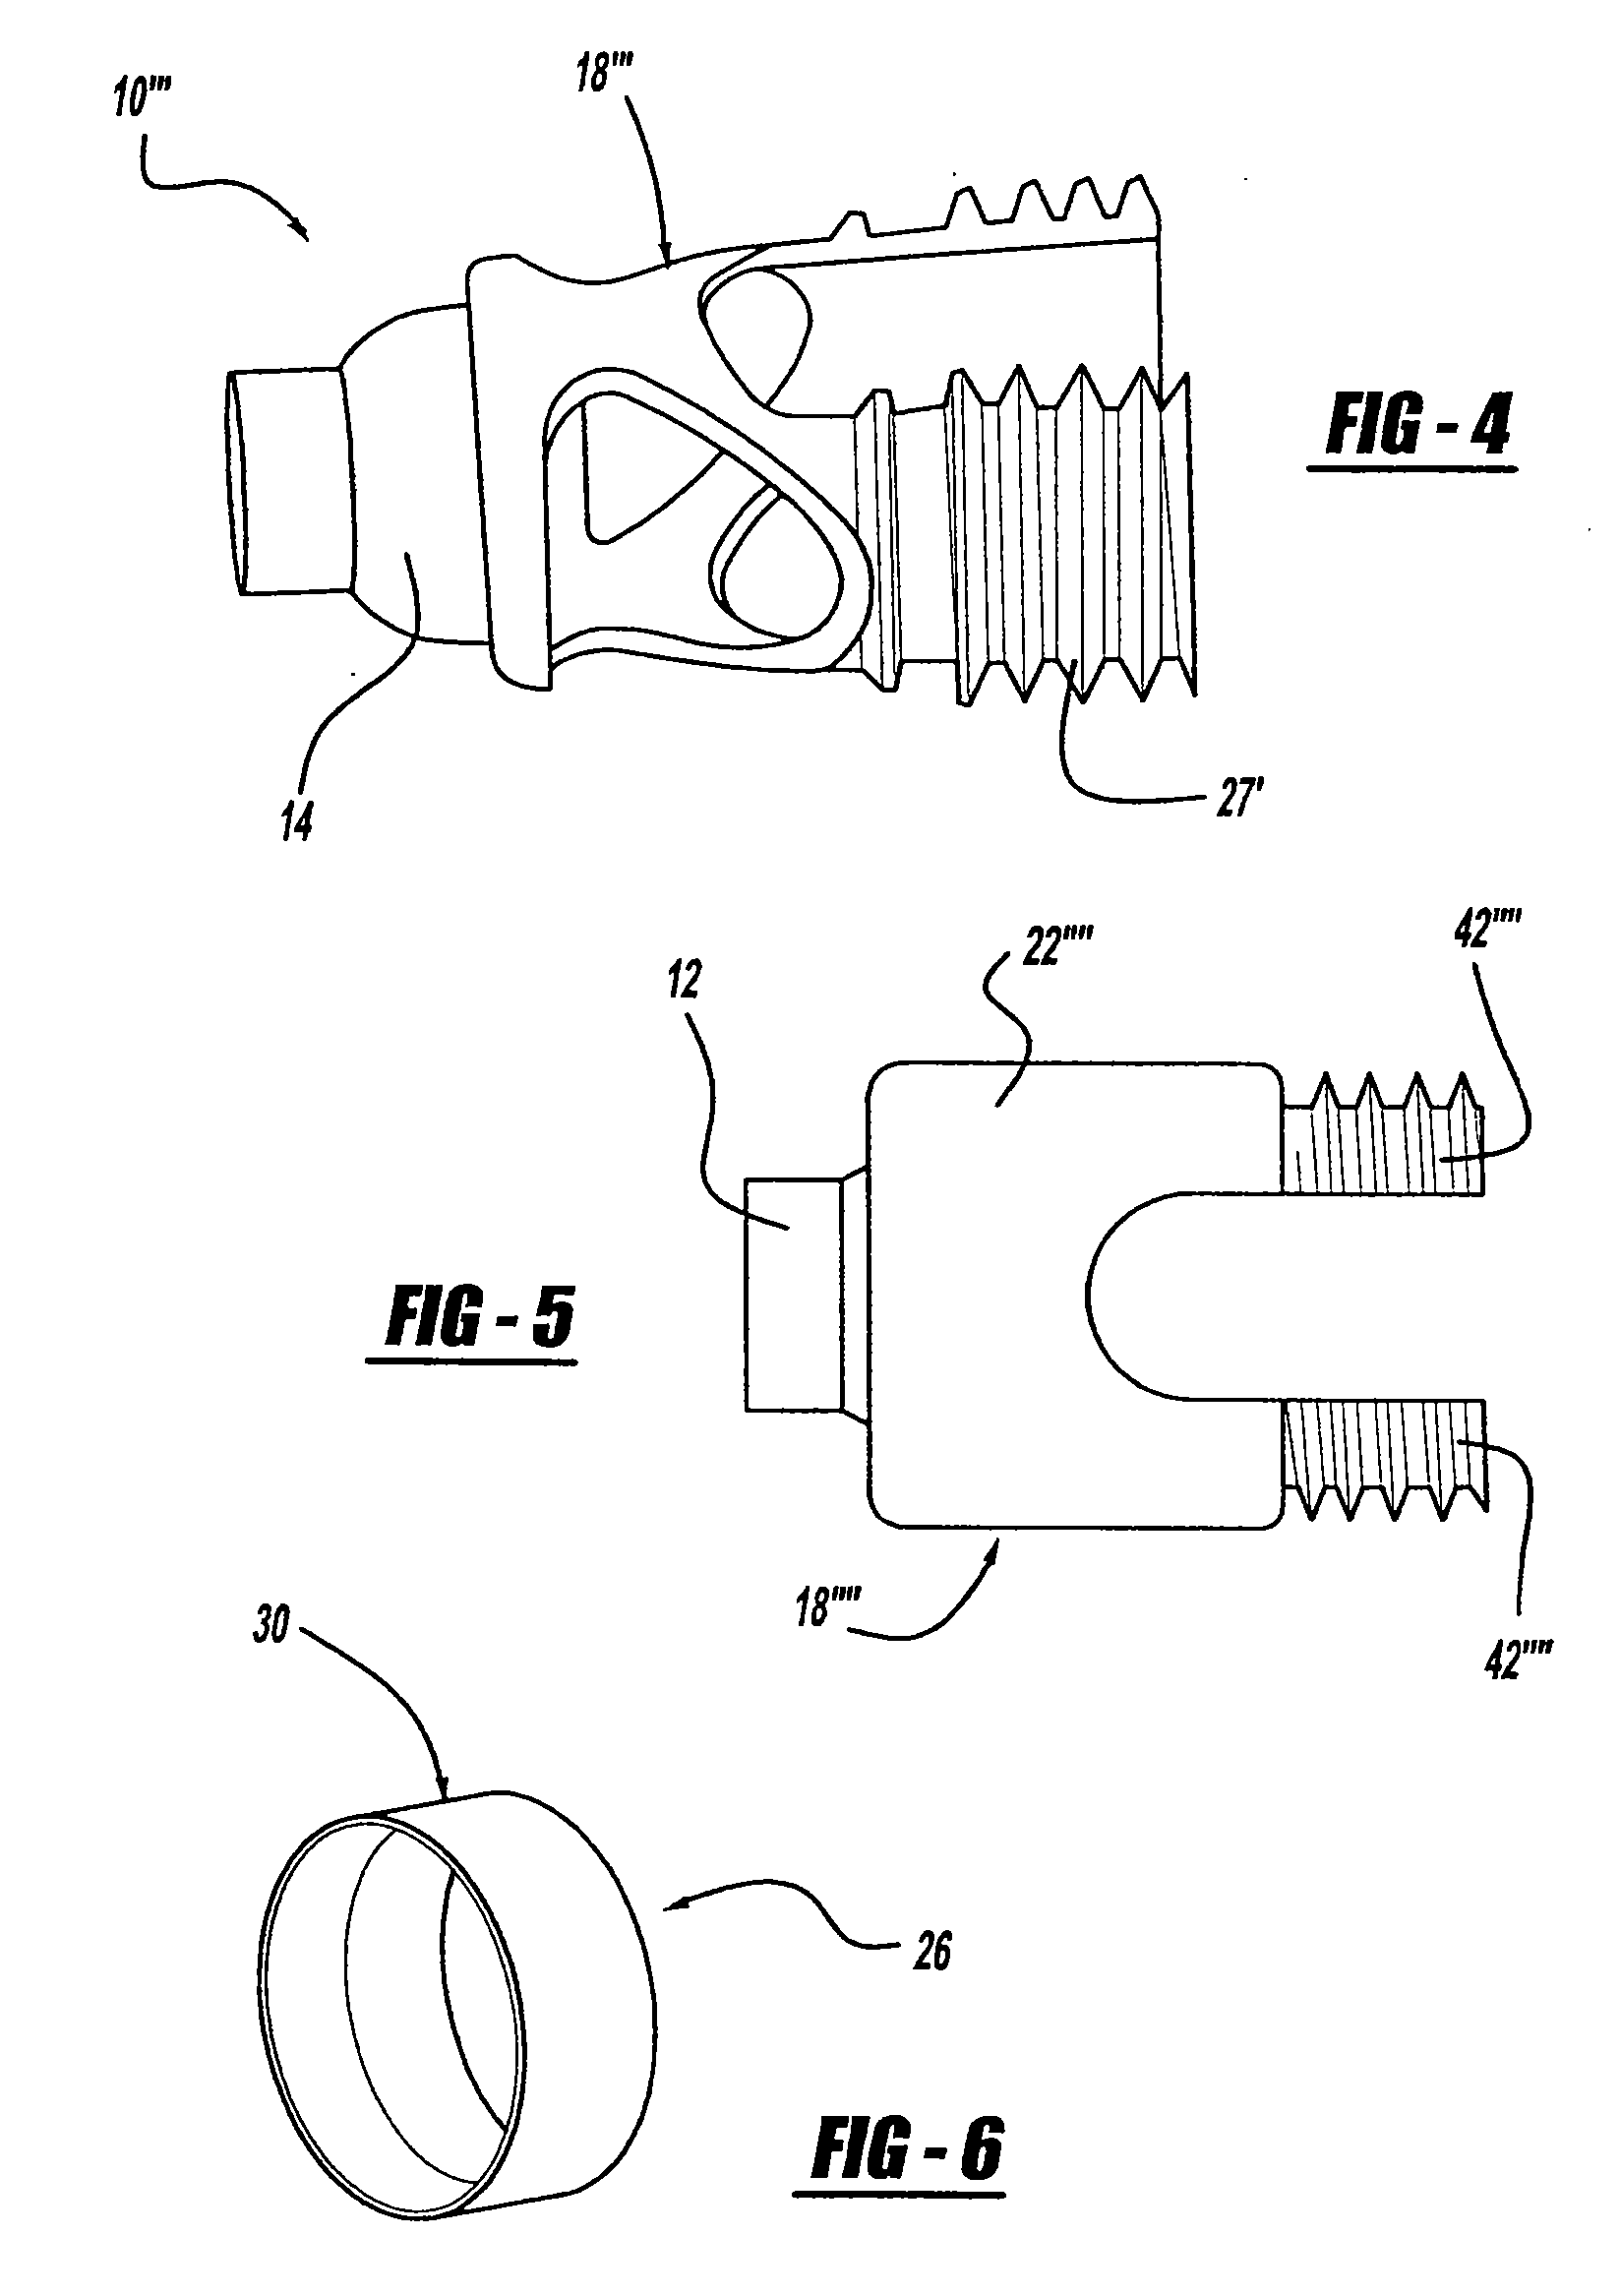 Screw and rod fixation assembly and device